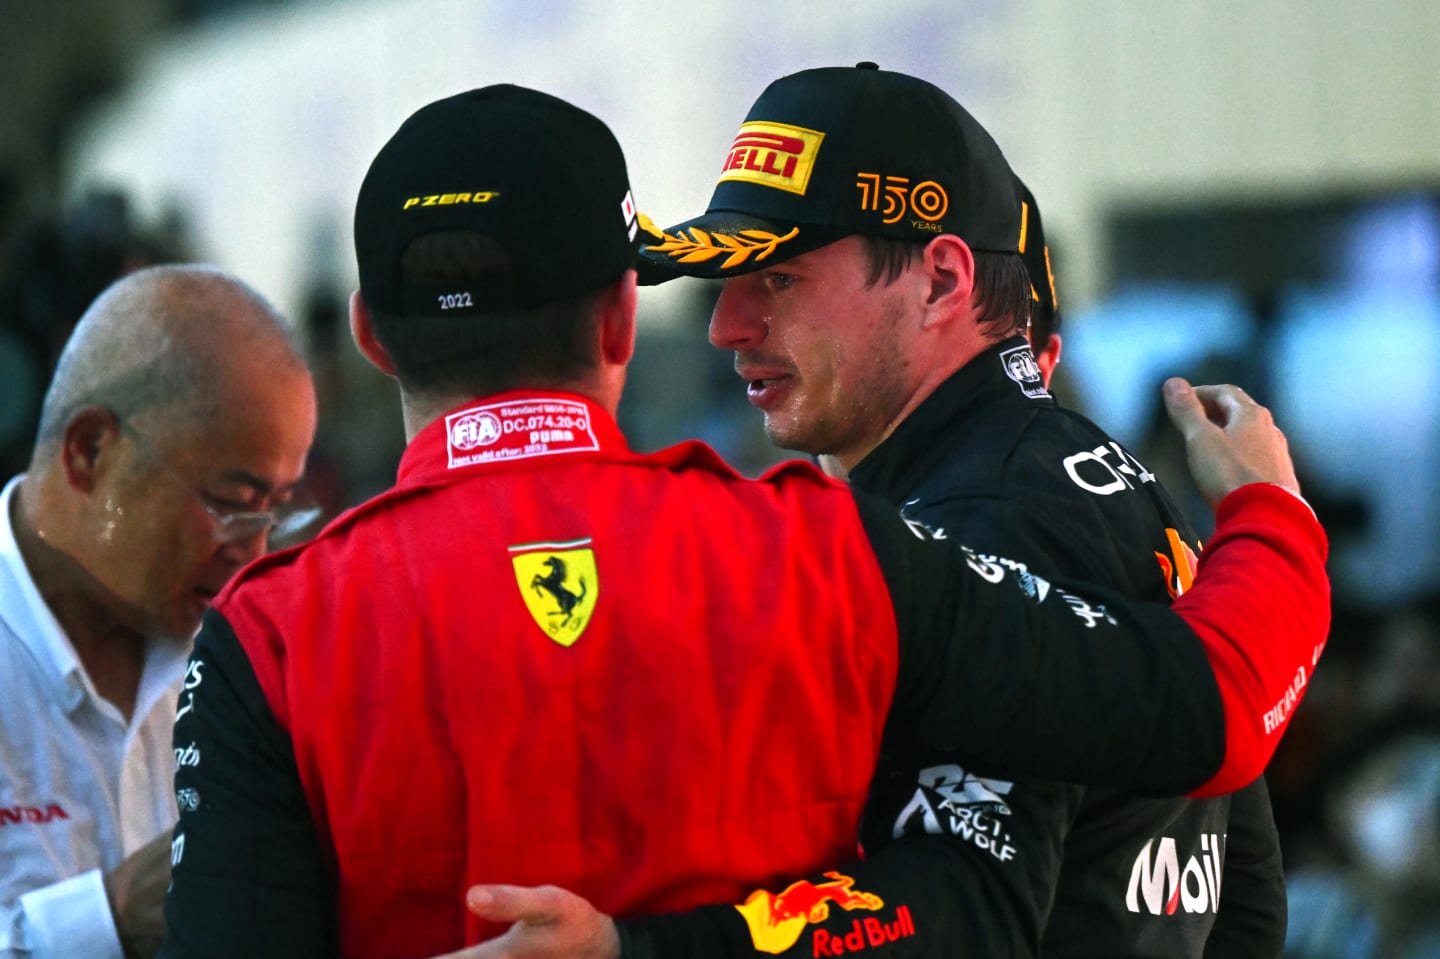 SUZUKA, JAPAN - OCTOBER 09: Race winner and 2022 F1 World Drivers Champion Max Verstappen of Netherlands and Oracle Red Bull Racing and Third placed Charles Leclerc of Monaco and Ferrari celebrate on the podium during the F1 Grand Prix of Japan at Suzuka International Racing Course on October 09, 2022 in Suzuka, Japan. (Photo by Clive Mason/Getty Images)